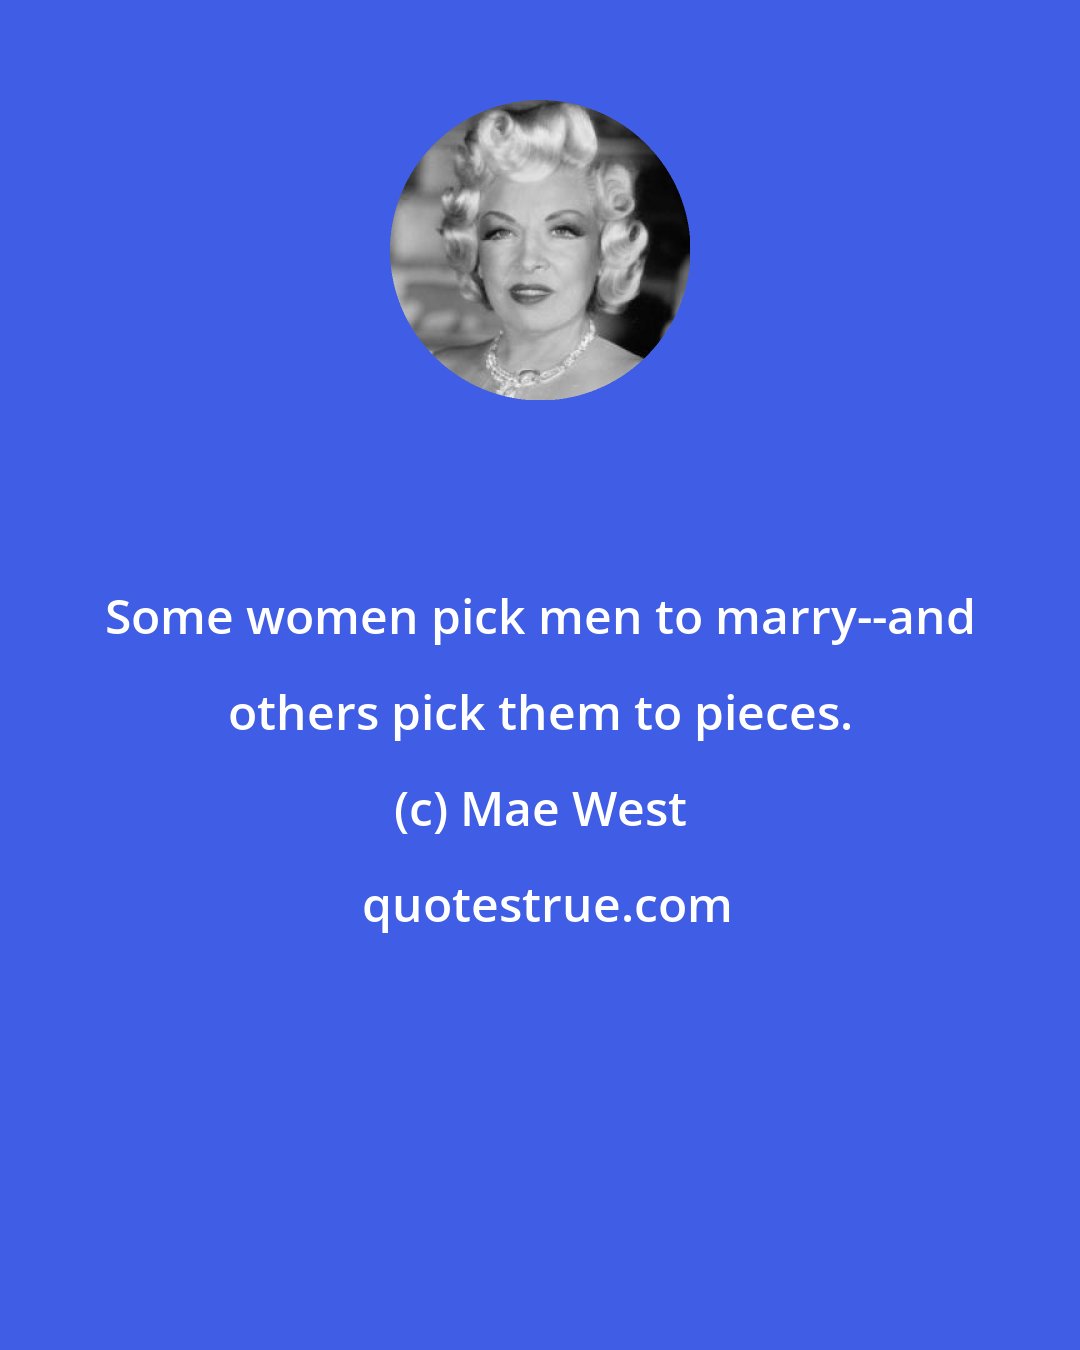 Mae West: Some women pick men to marry--and others pick them to pieces.